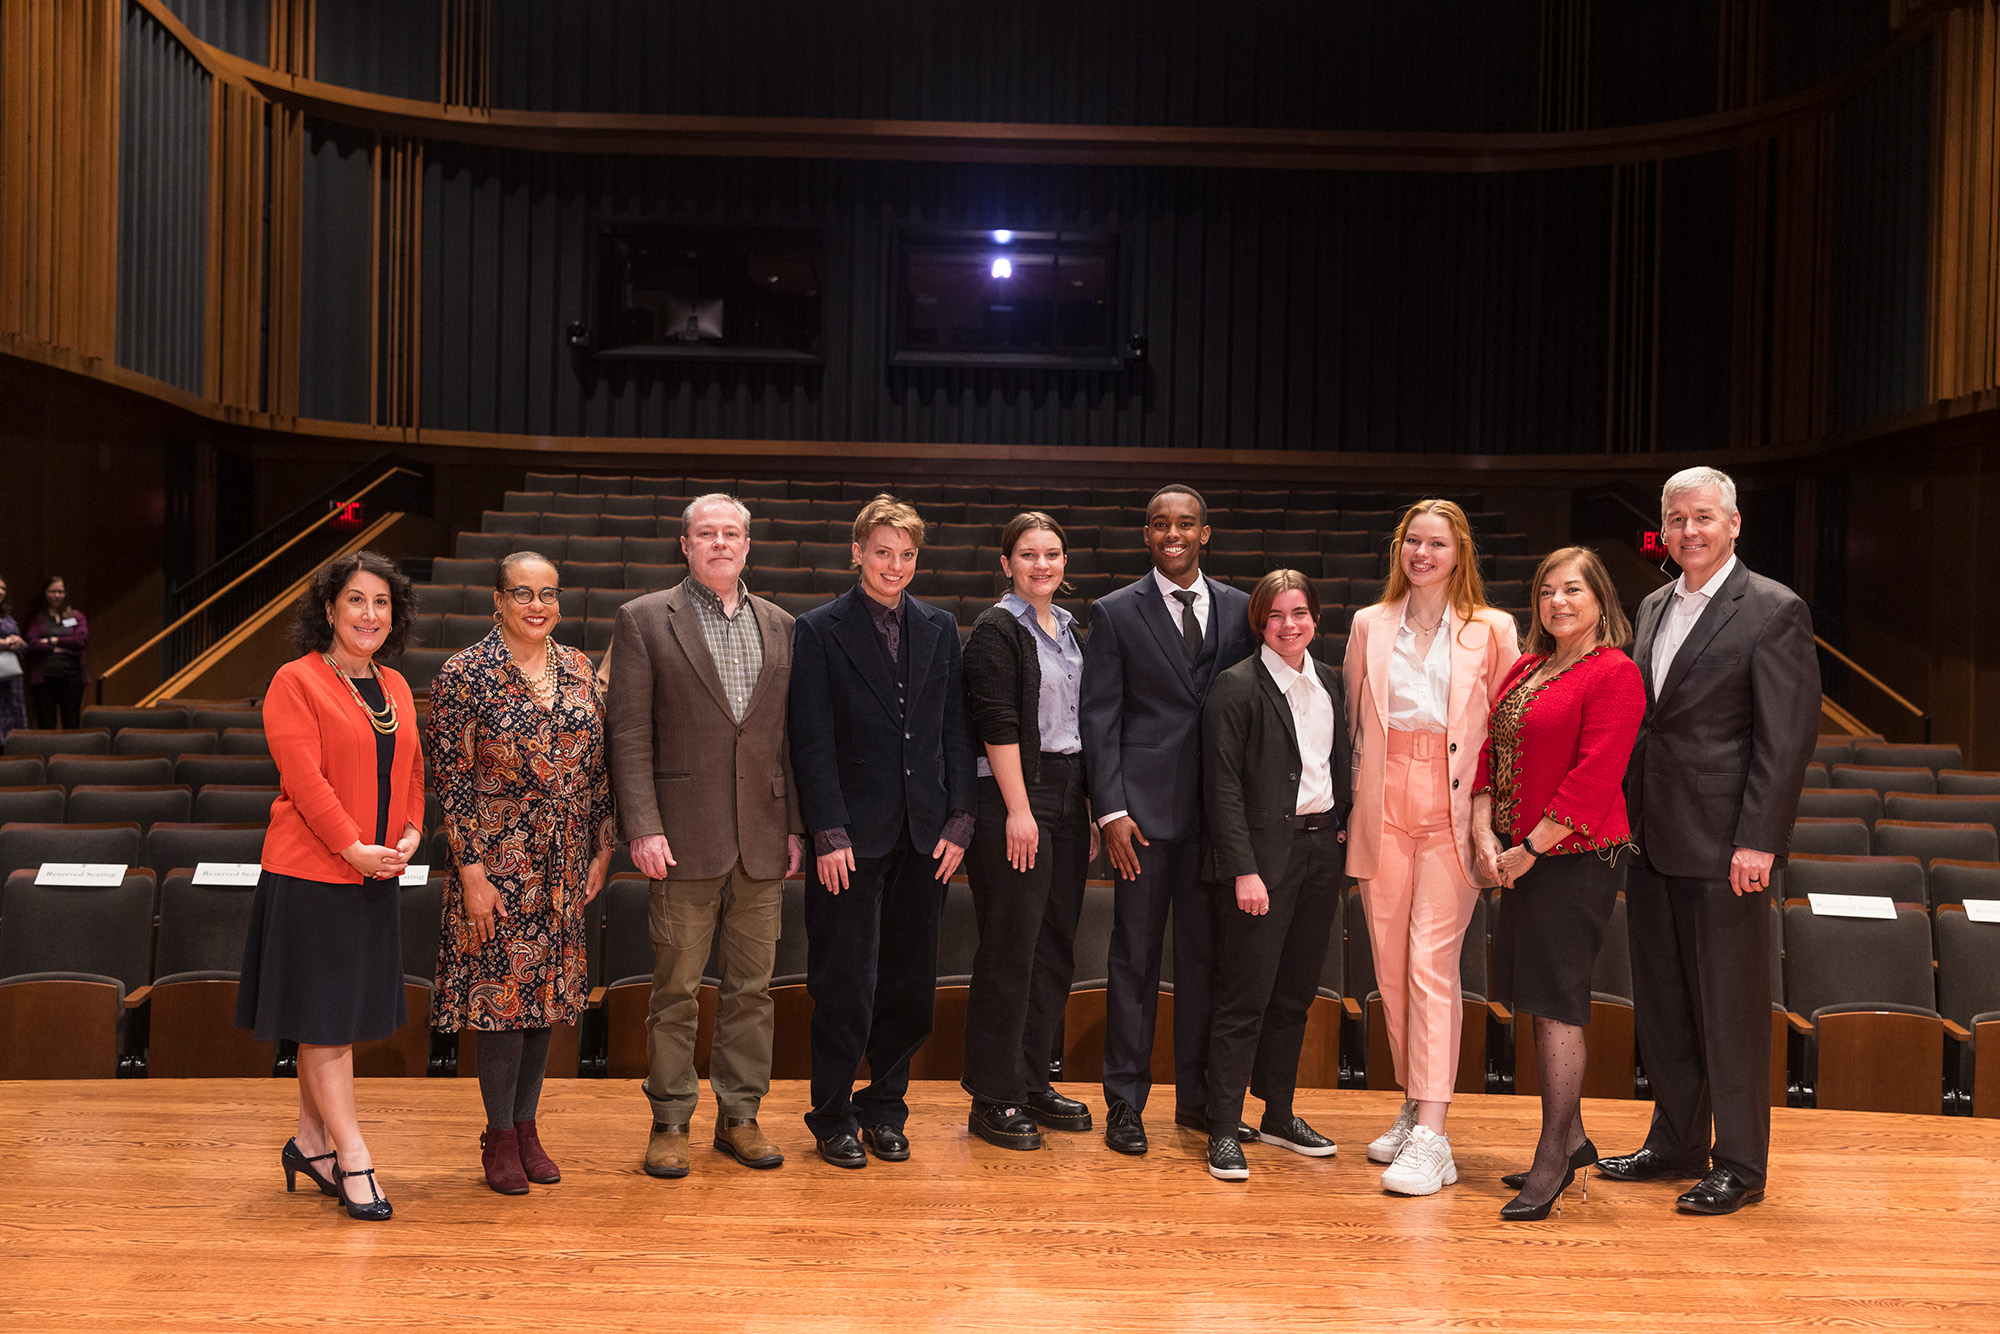 Congress to Campus participants, including students, faculty, and President Rivera, pose with former US representatives on stage in Mairs Concert Hall.